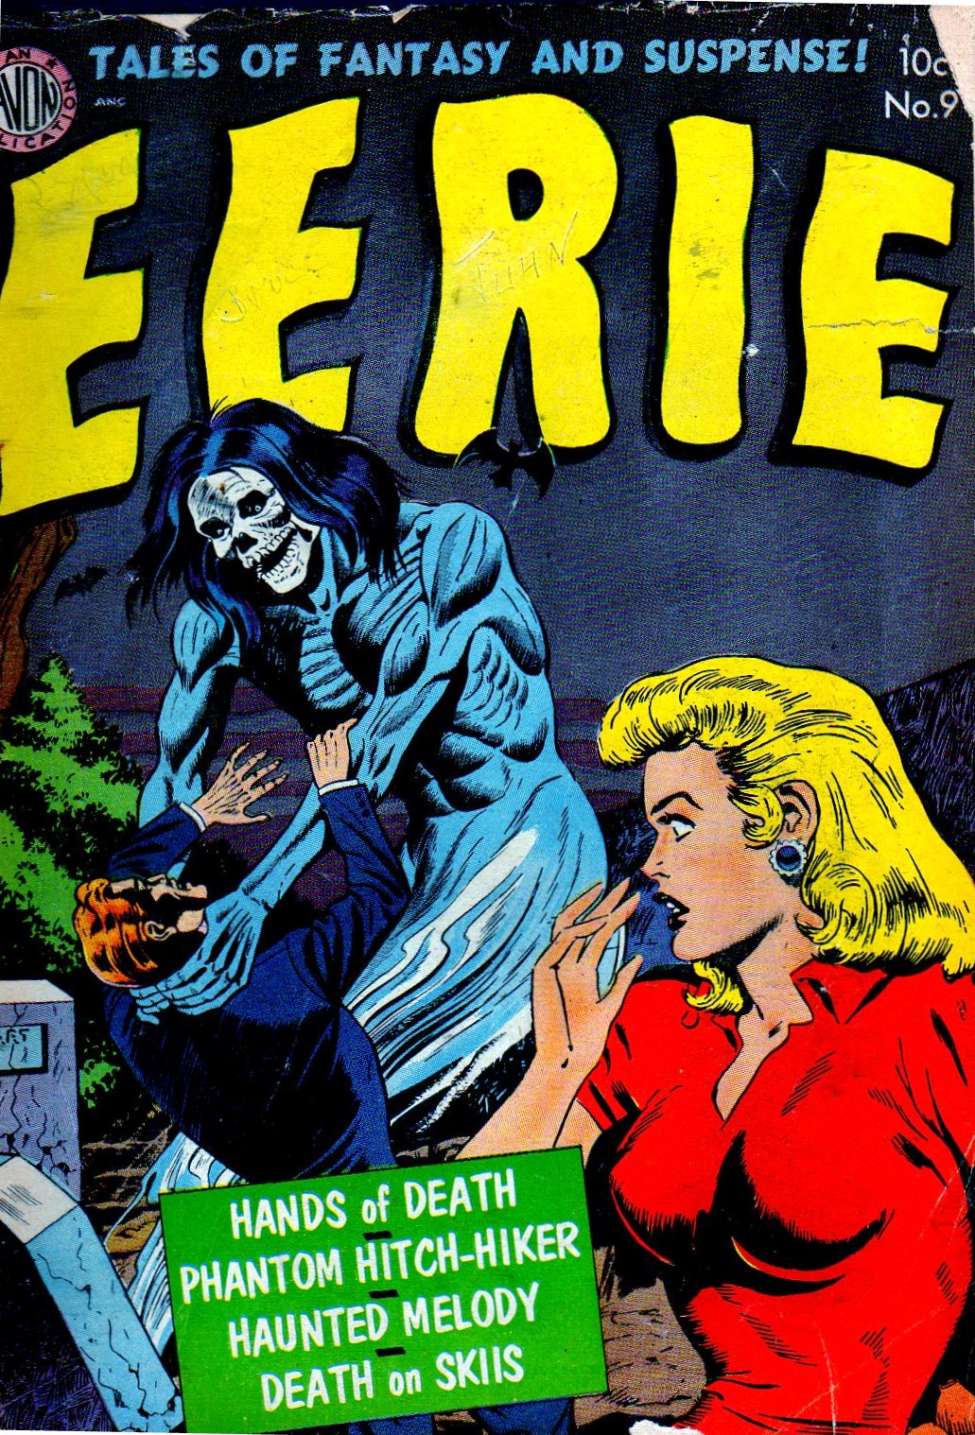 Book Cover For Eerie 9